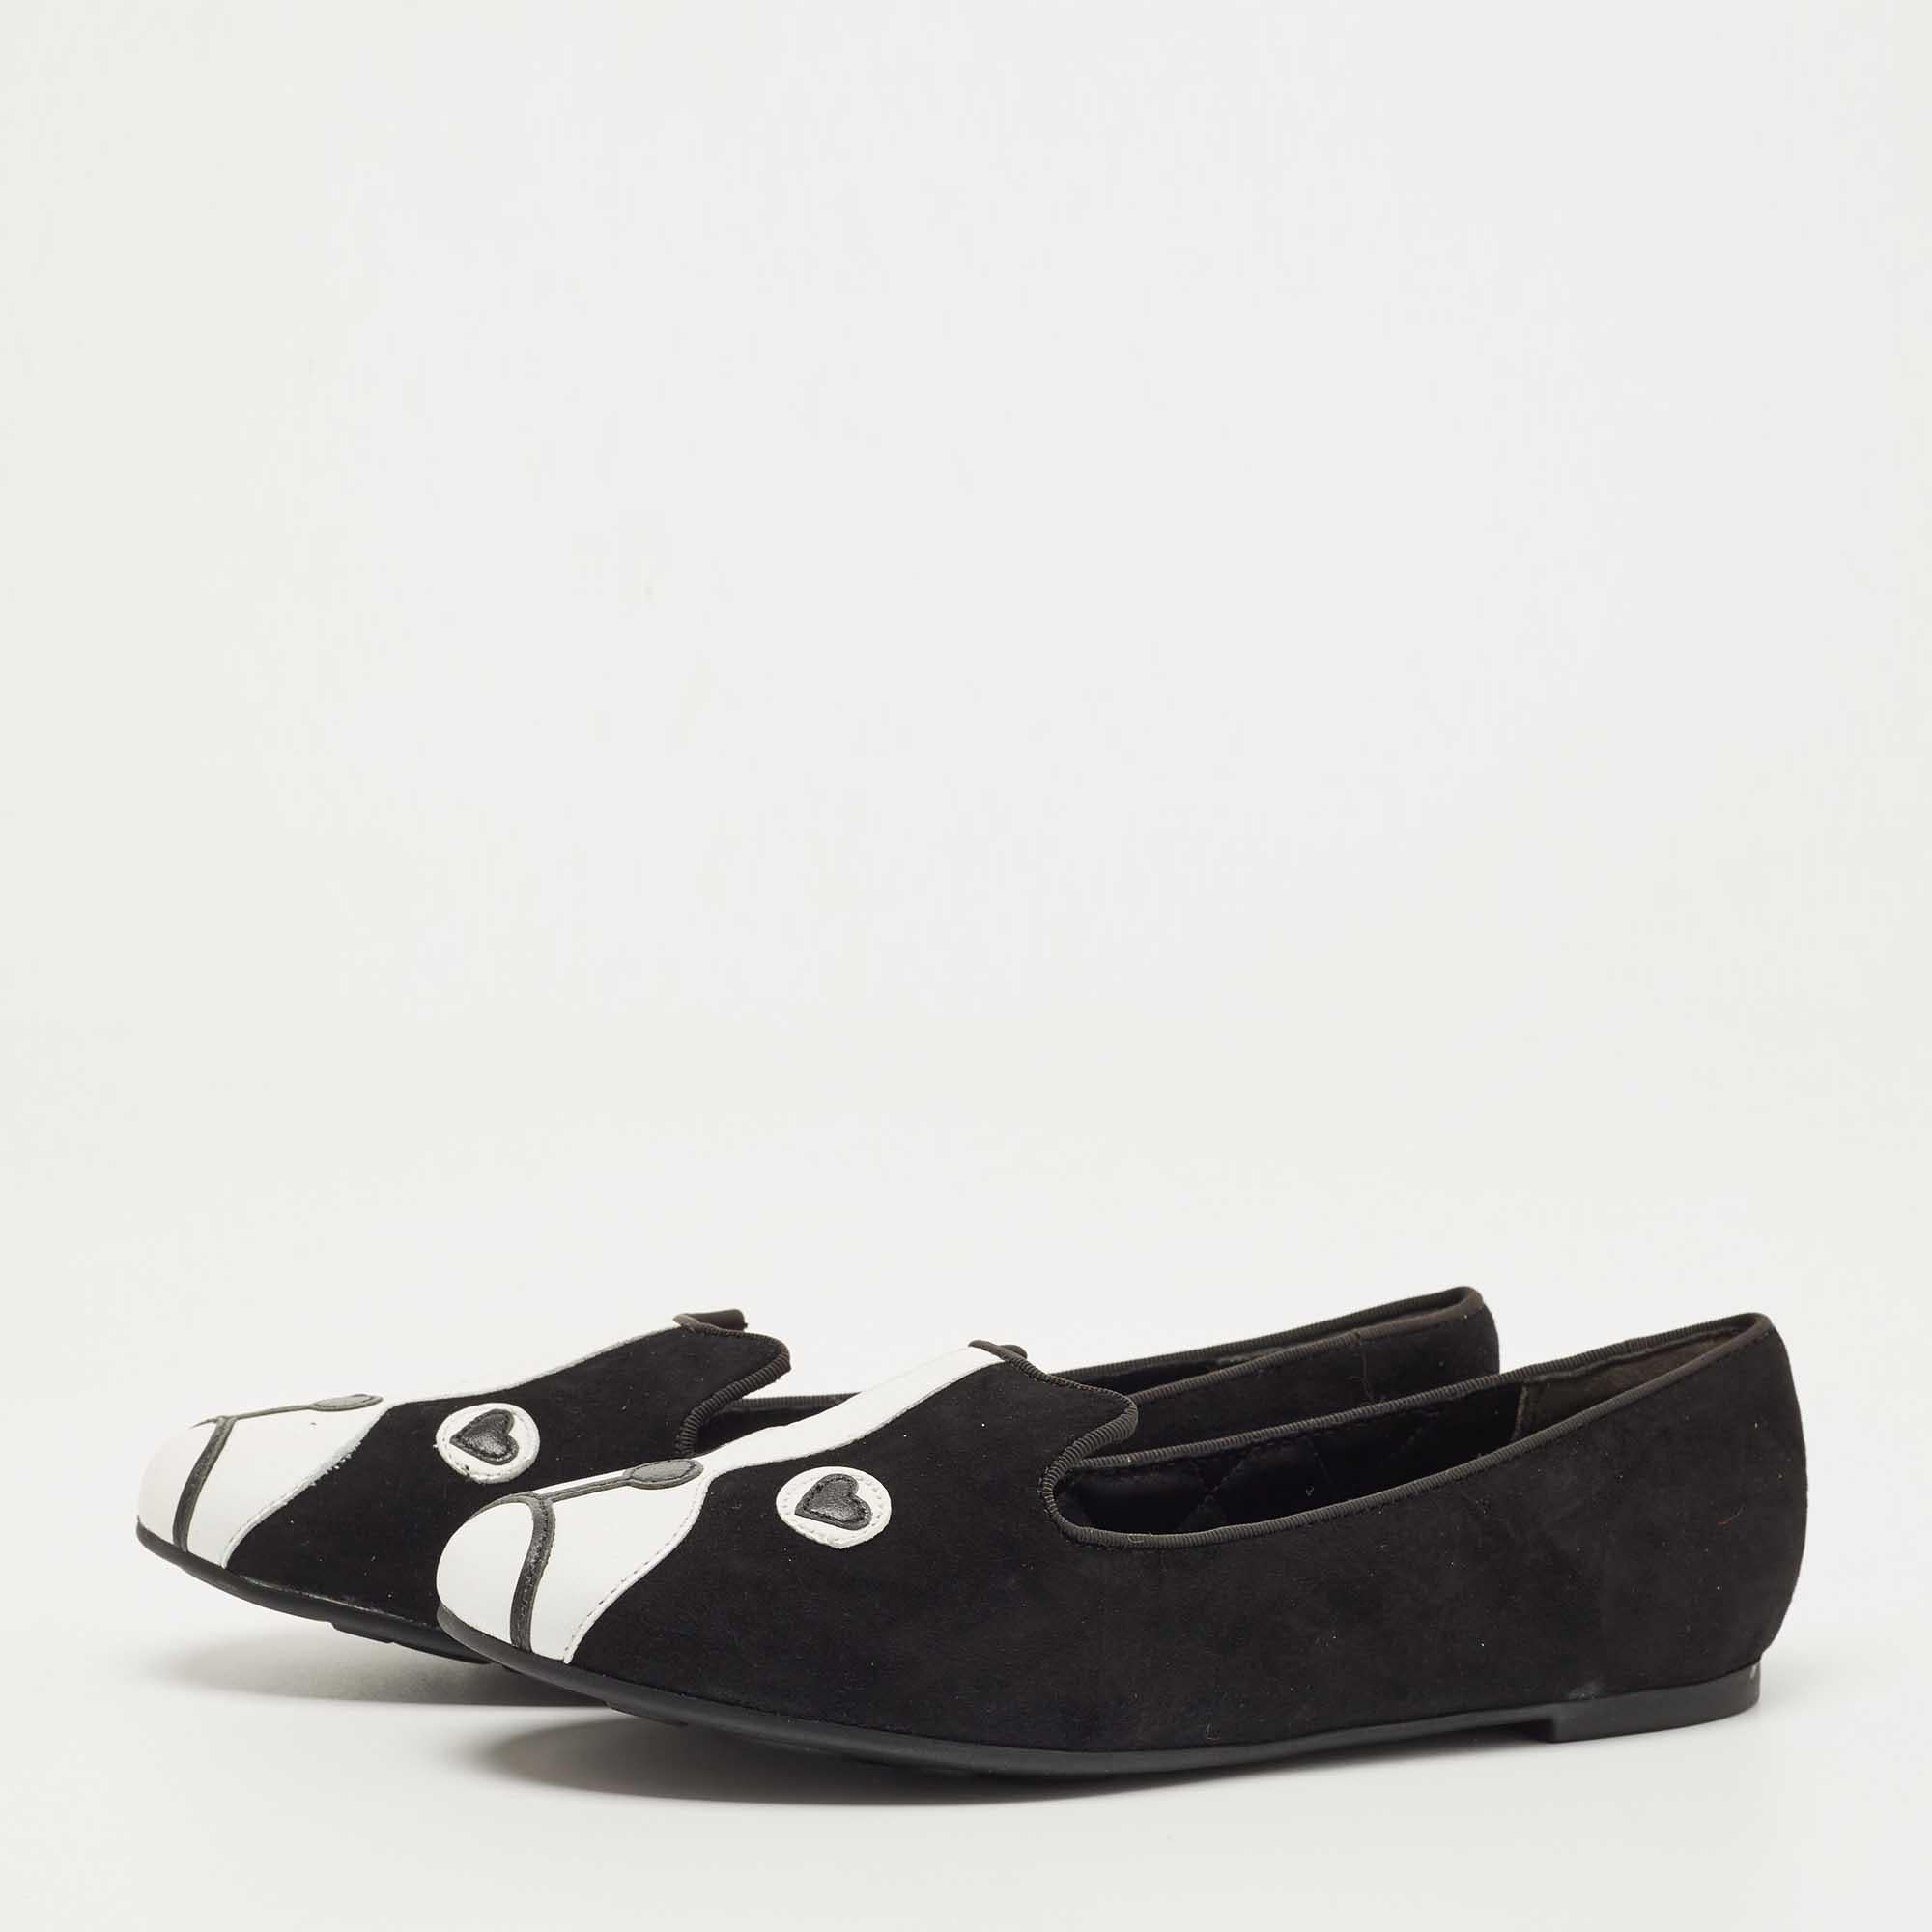 Marc by Marc Jacobs Black/White Suede and Leather Cat Ballet Flats Size 36 5